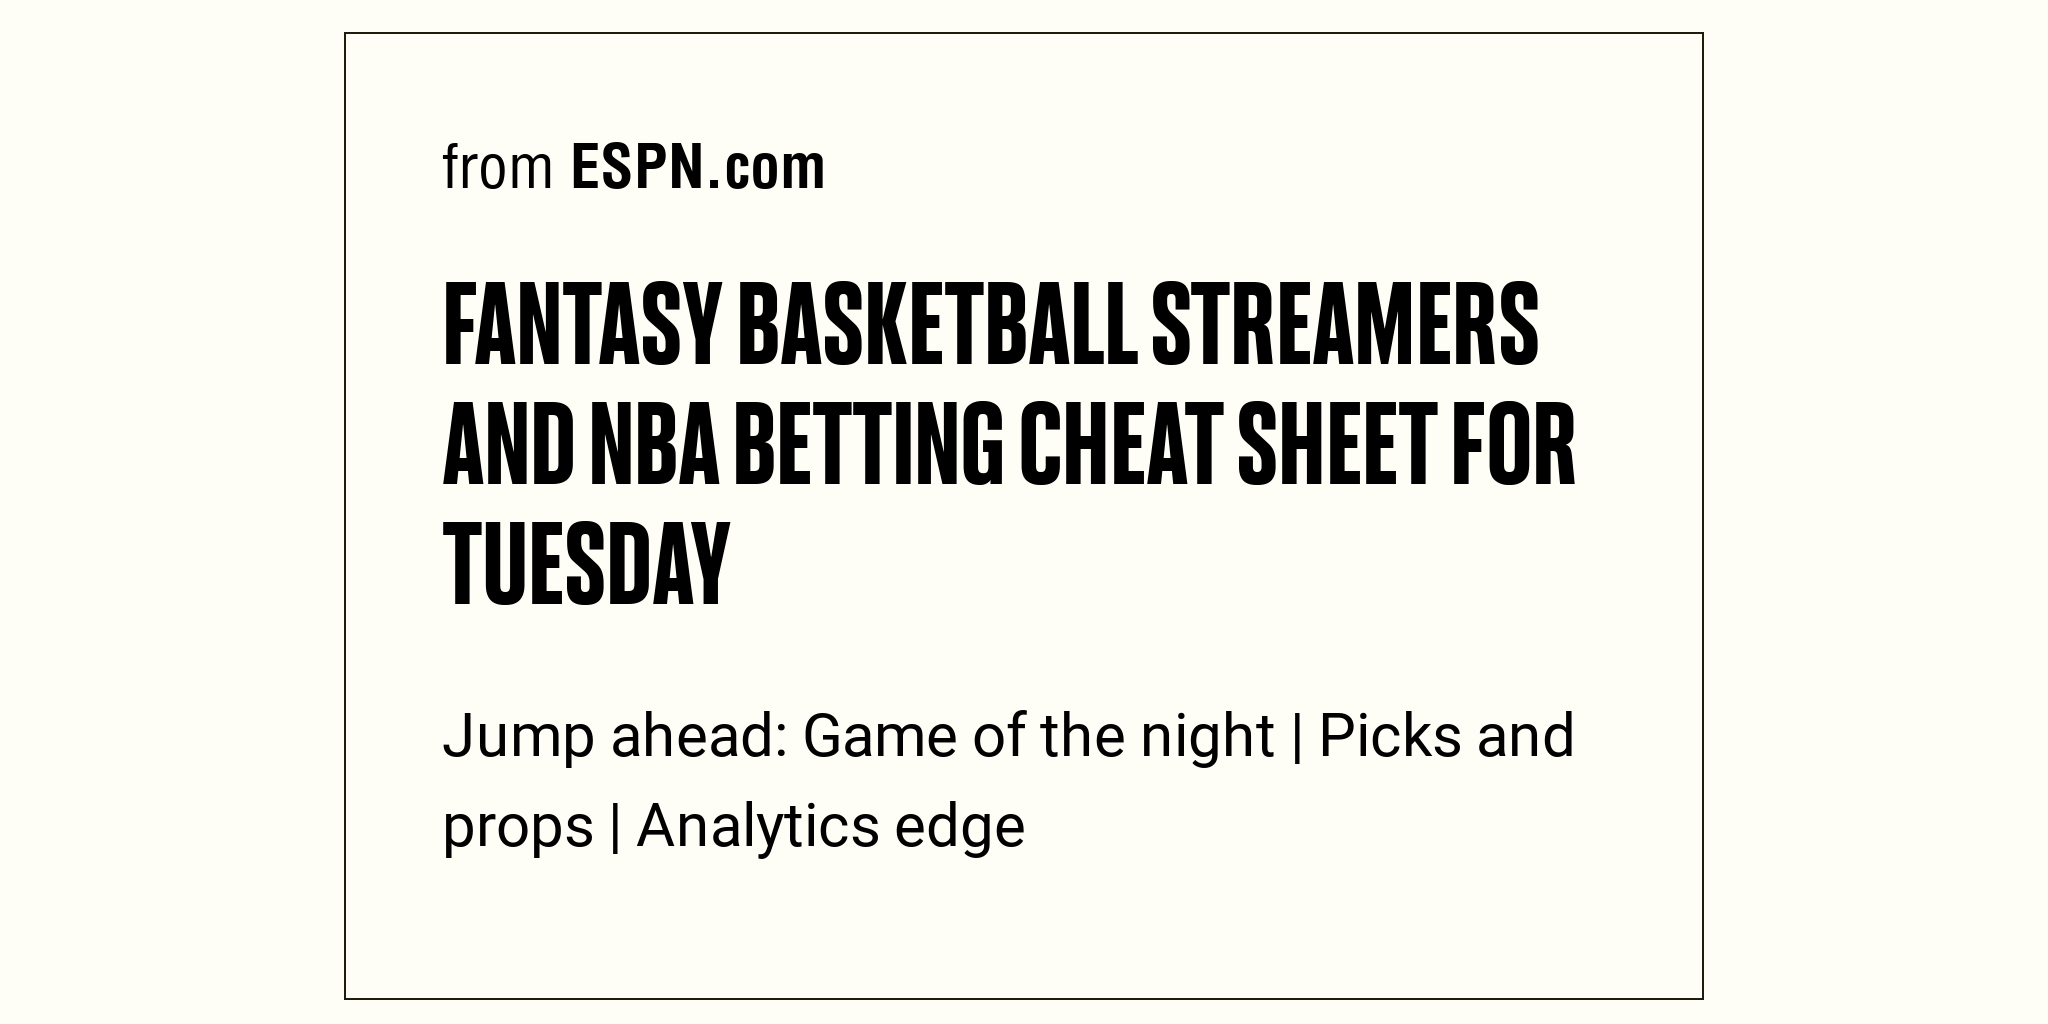 Fantasy basketball streamers and NBA betting cheat sheet for Tuesday